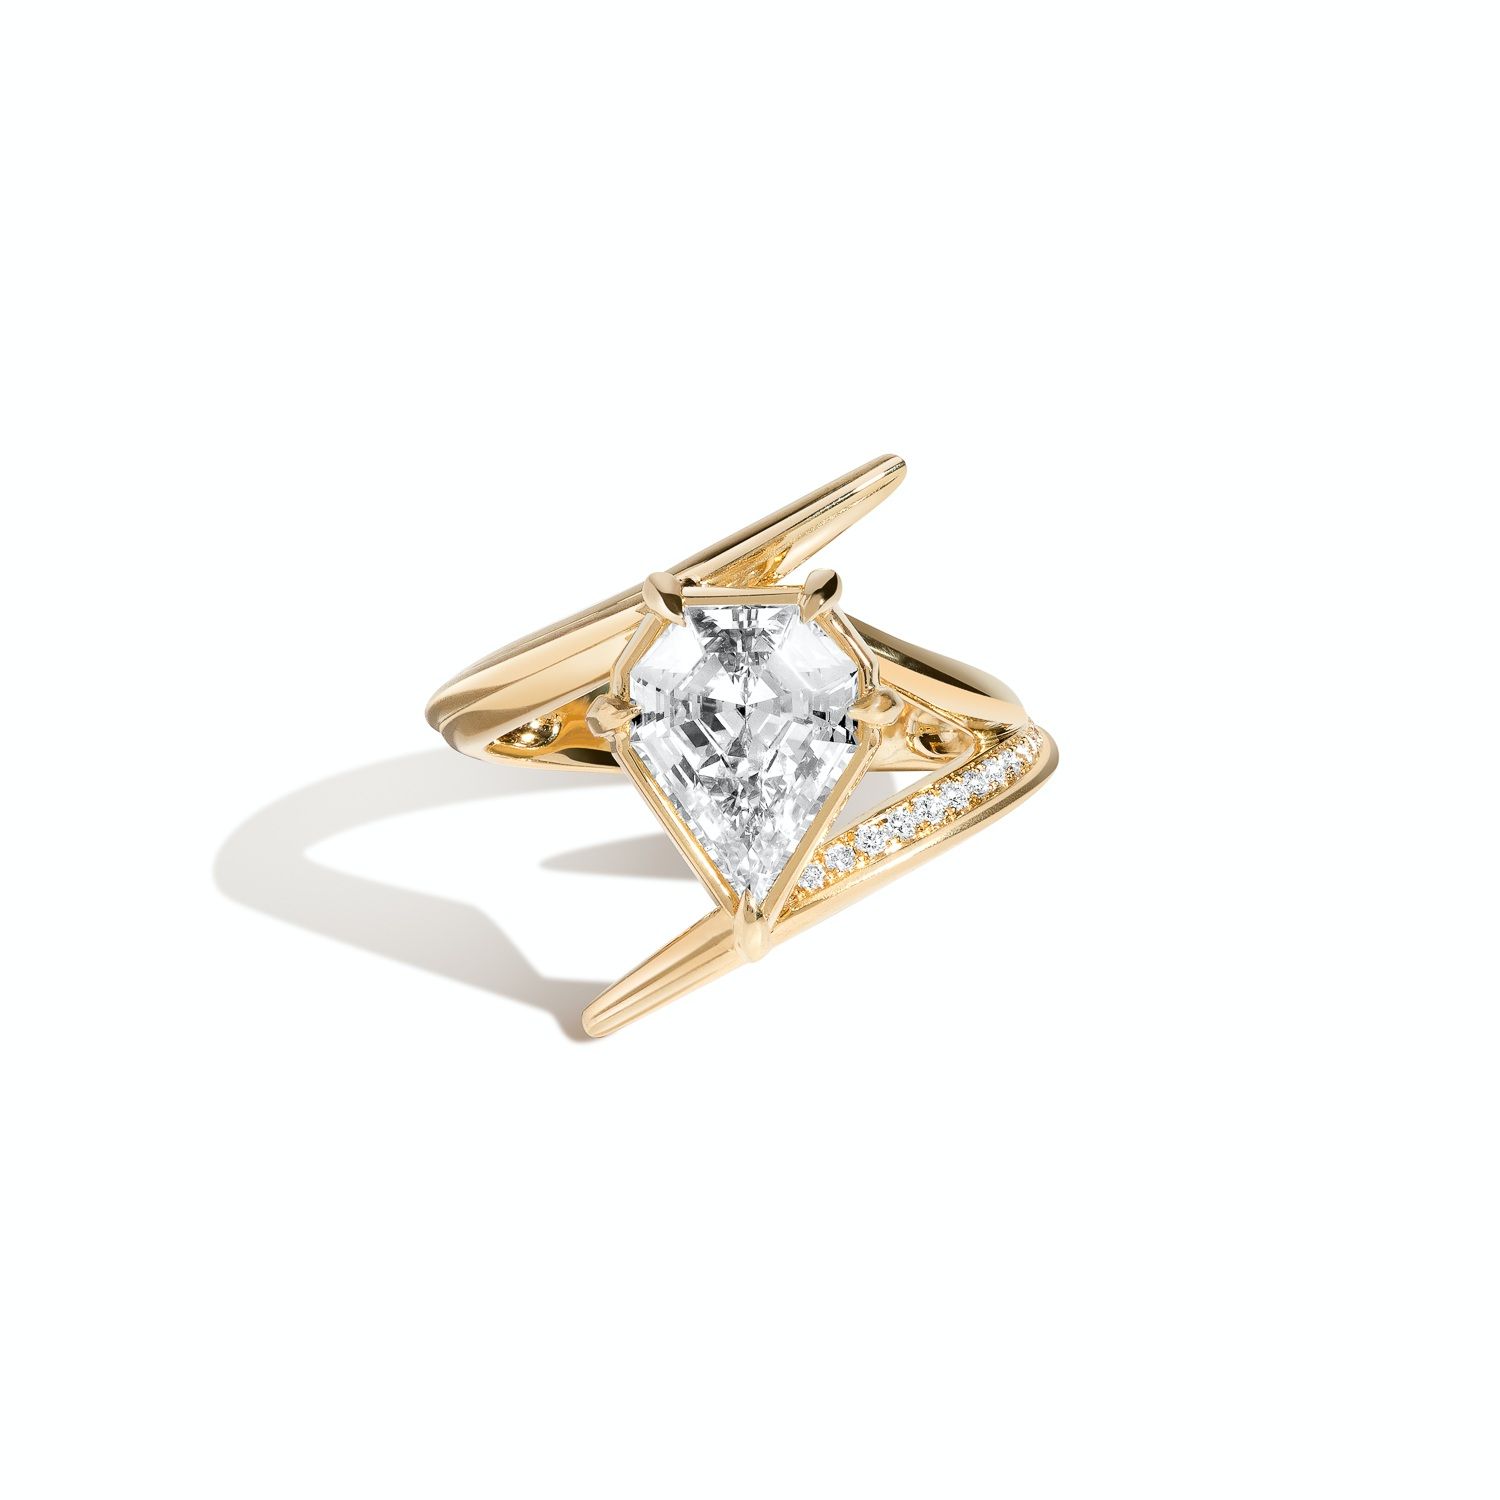 All You Need to Know About Engagement Rings and the Latest Trends